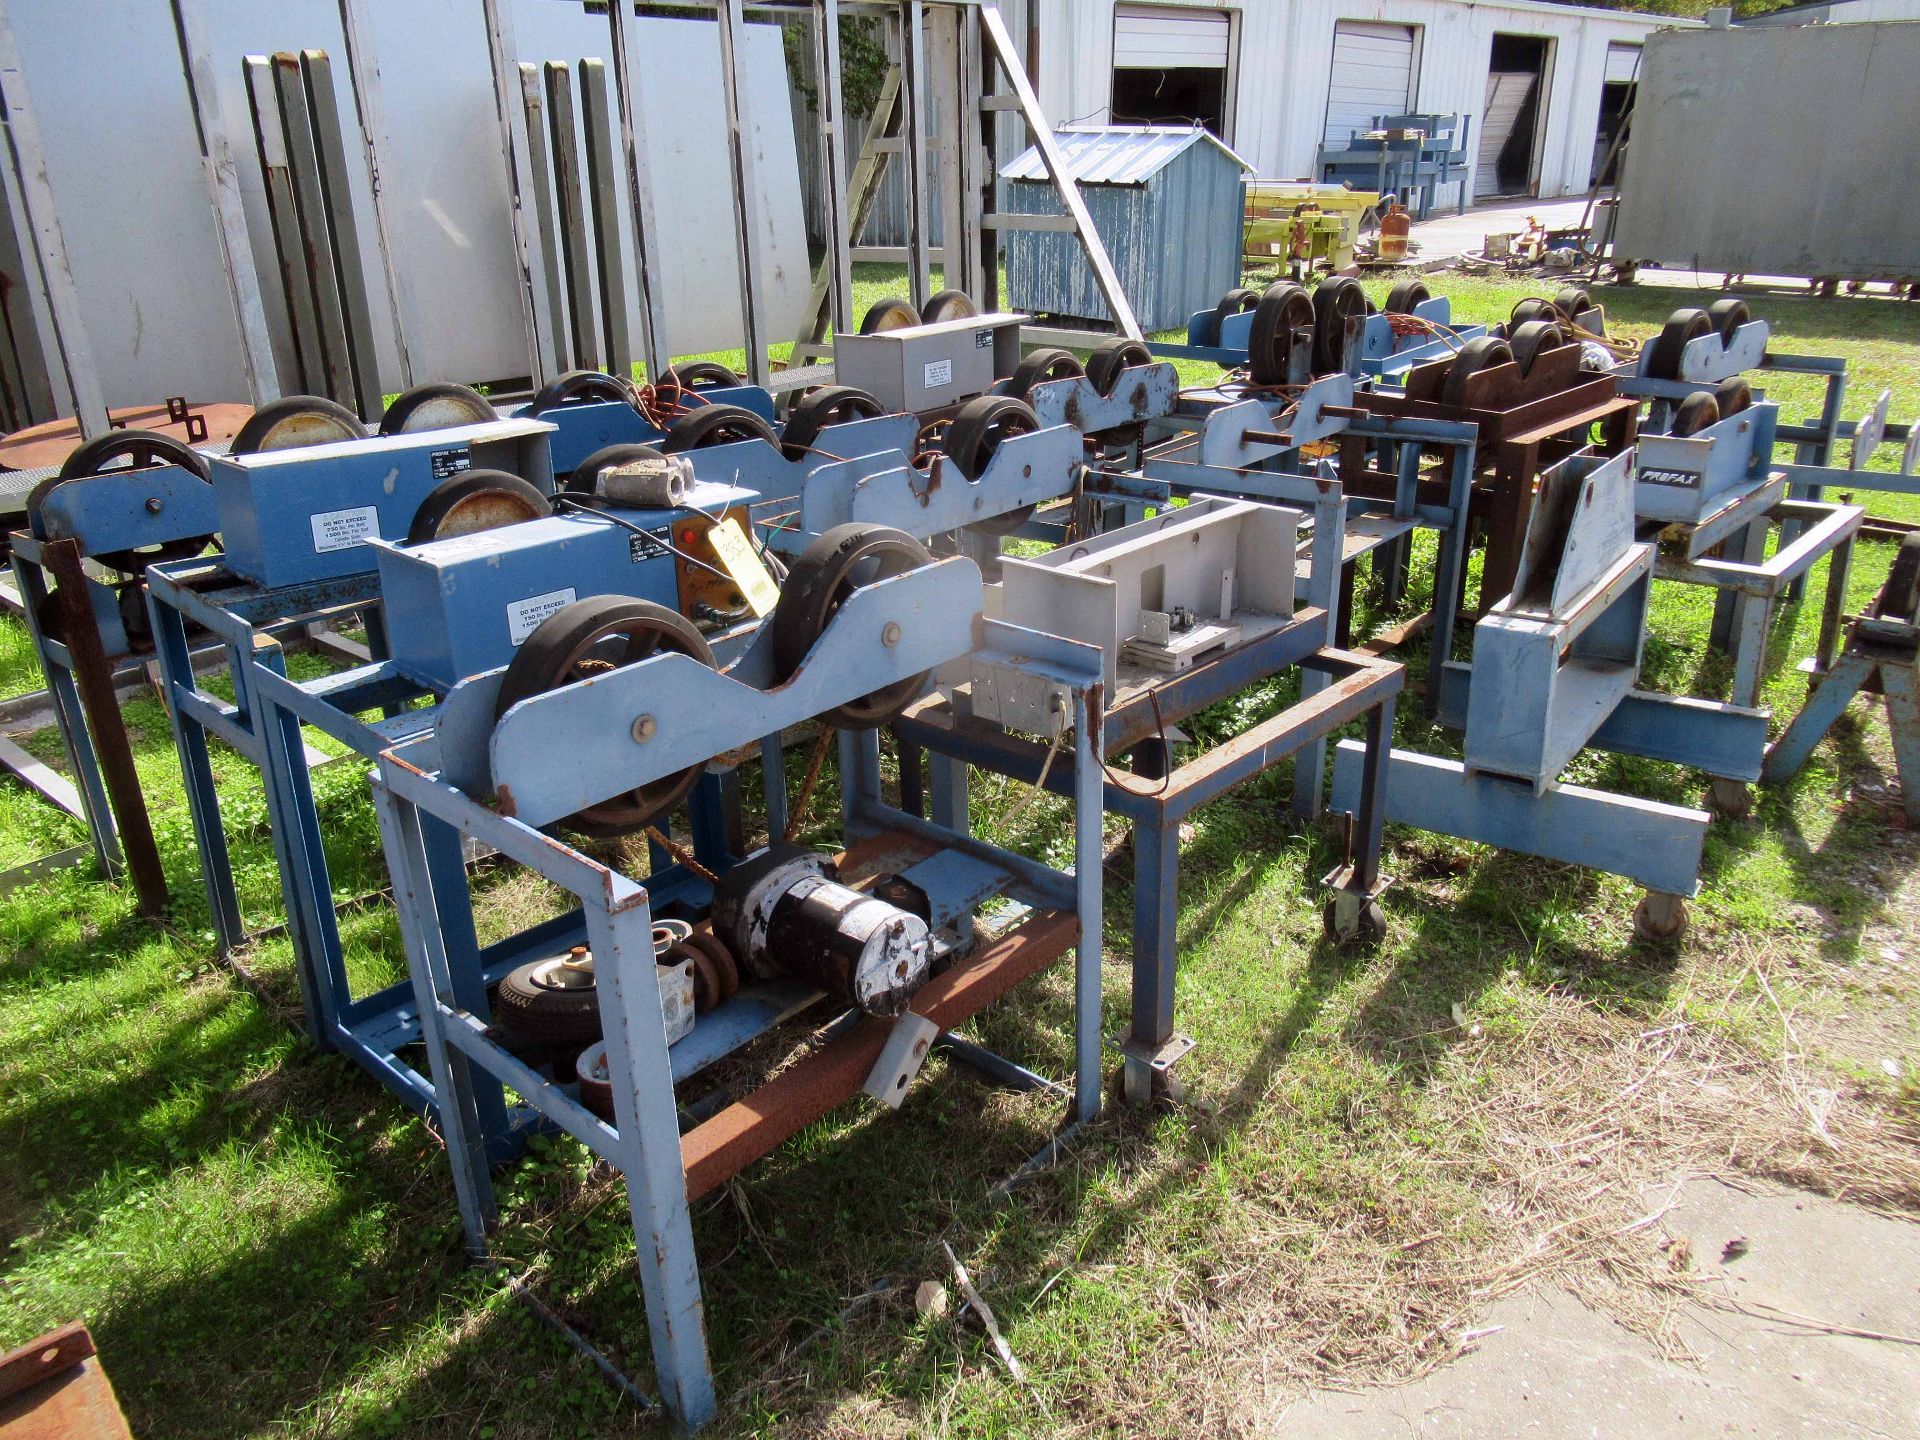 LOT OF TANK TURNING ROLLS (10 PLUS), PROFAX MDL. TR-1500, 750 lb. cap., variable speed, mounted on